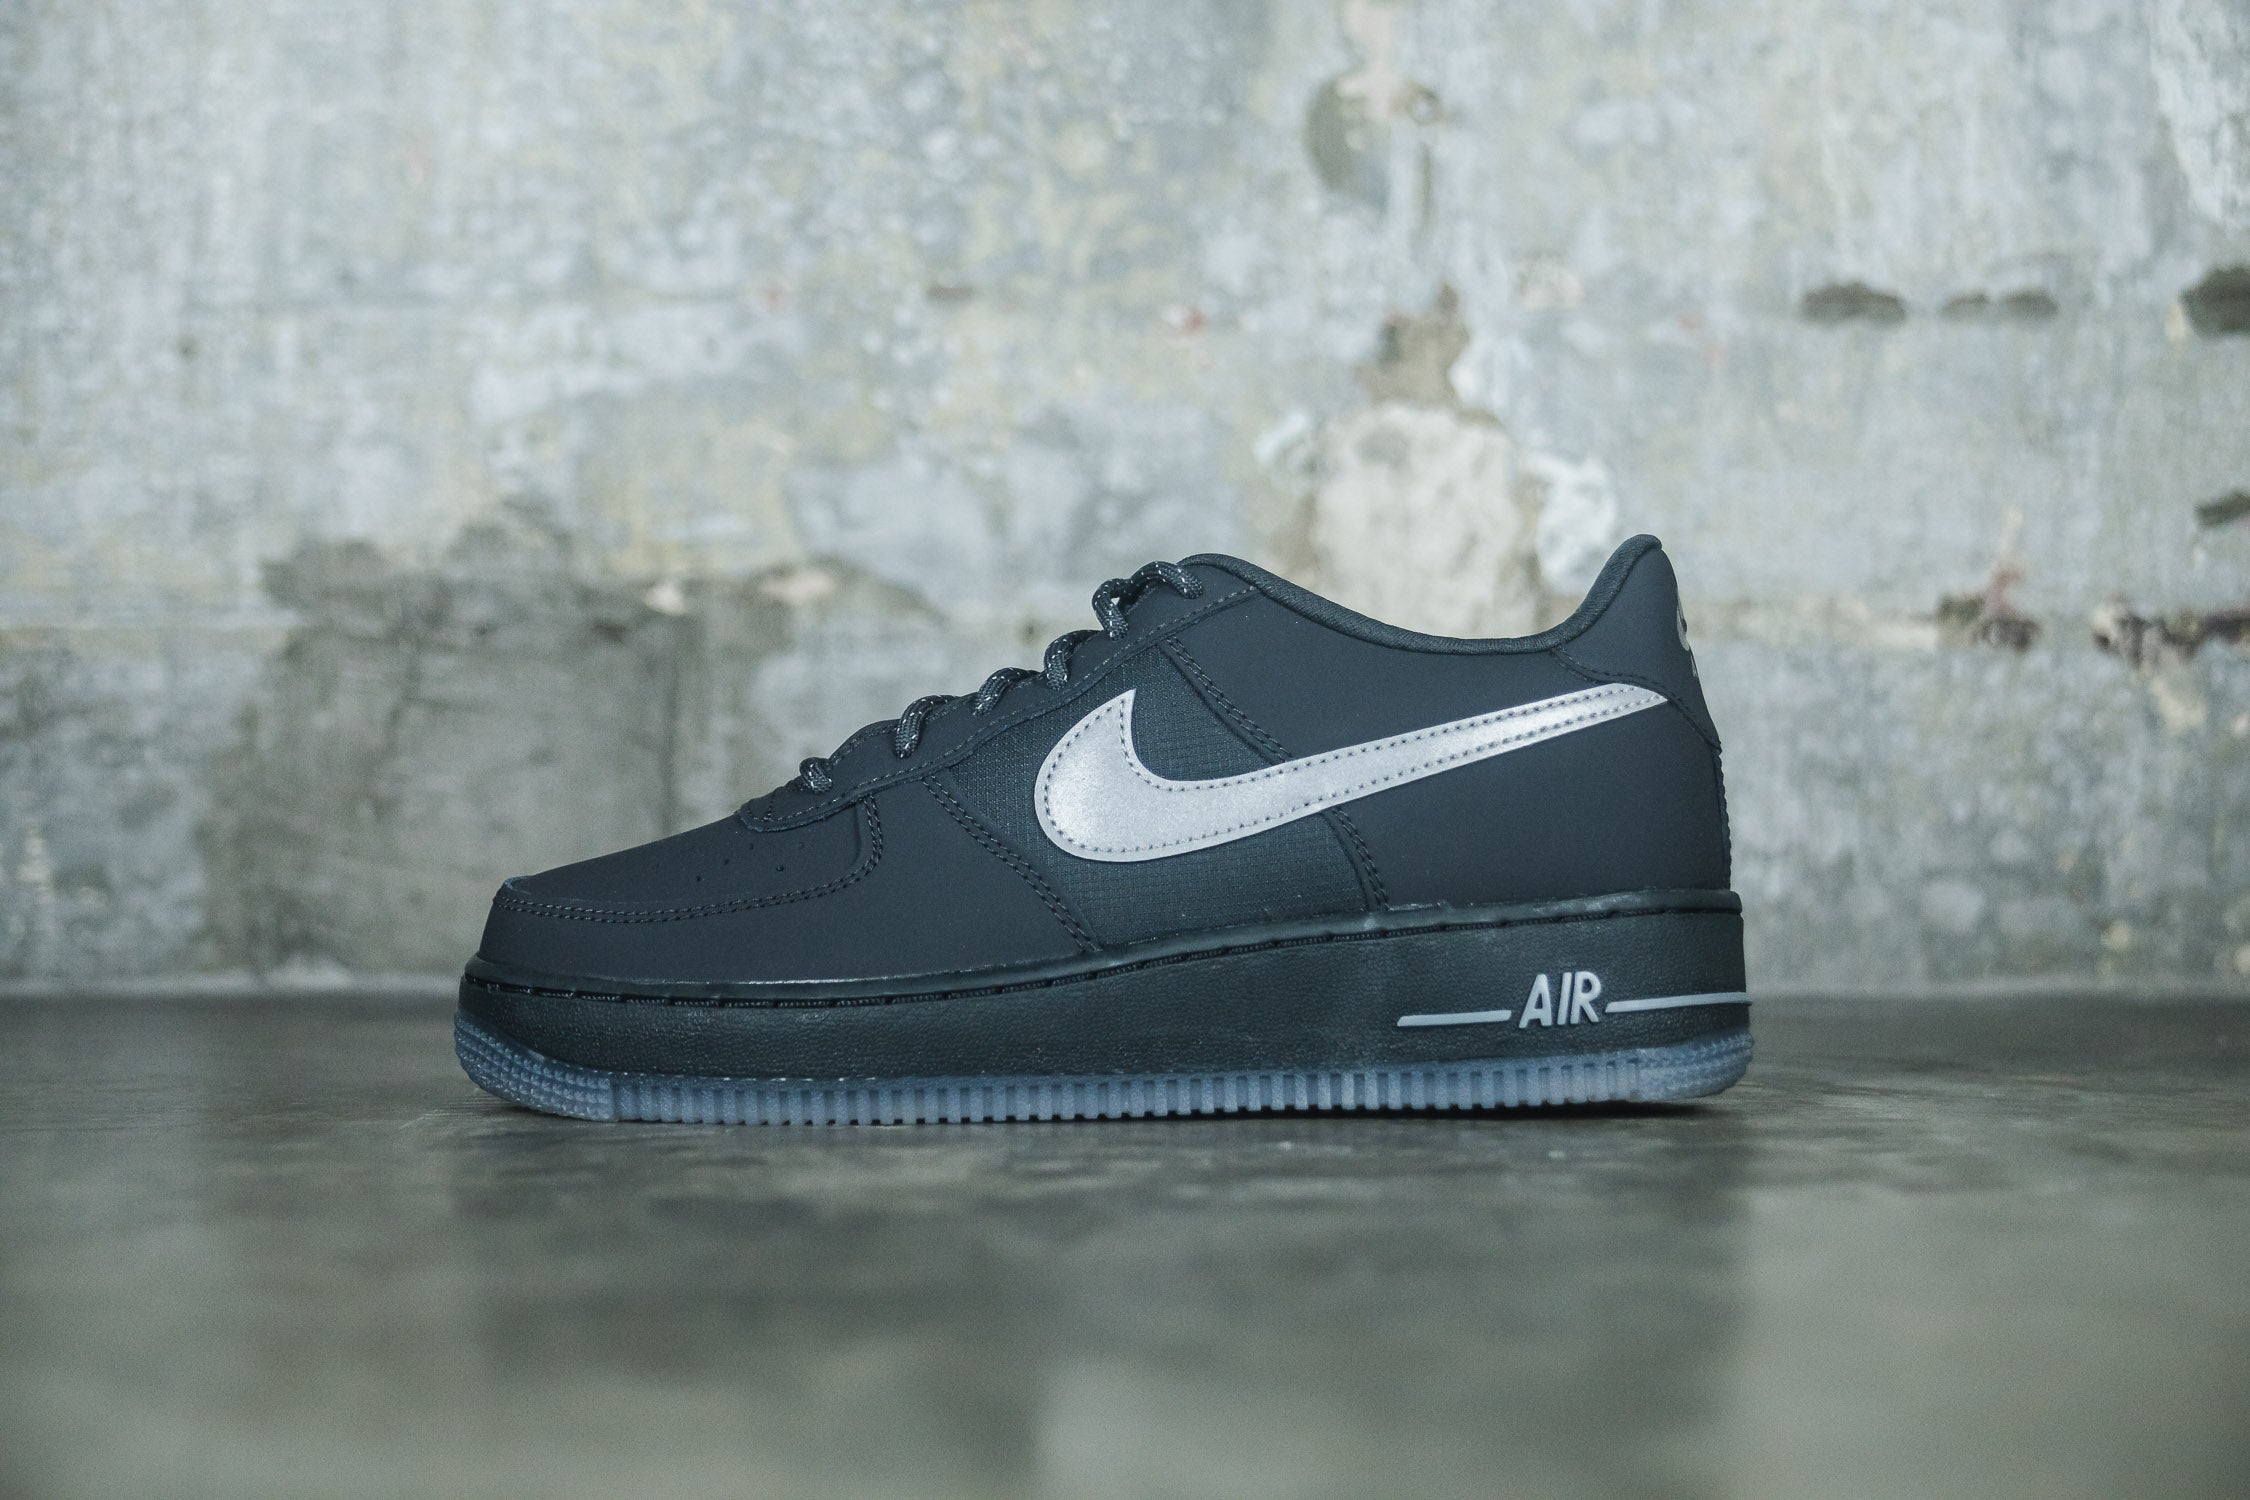 Nike Air Force 1 Low Reflective Swoosh